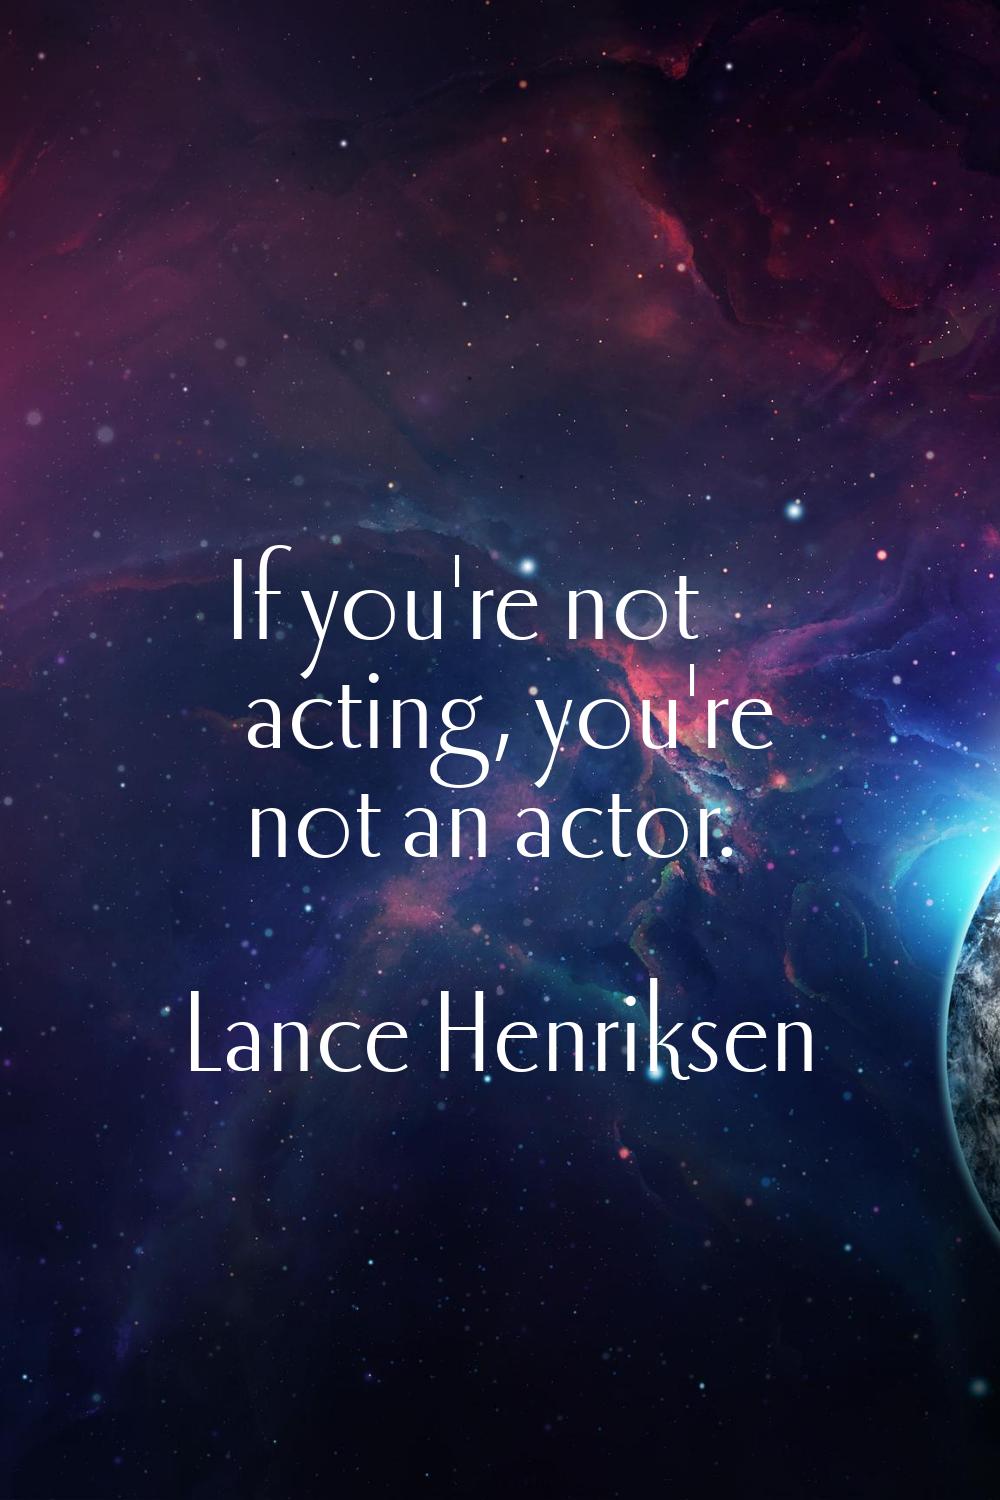 If you're not acting, you're not an actor.